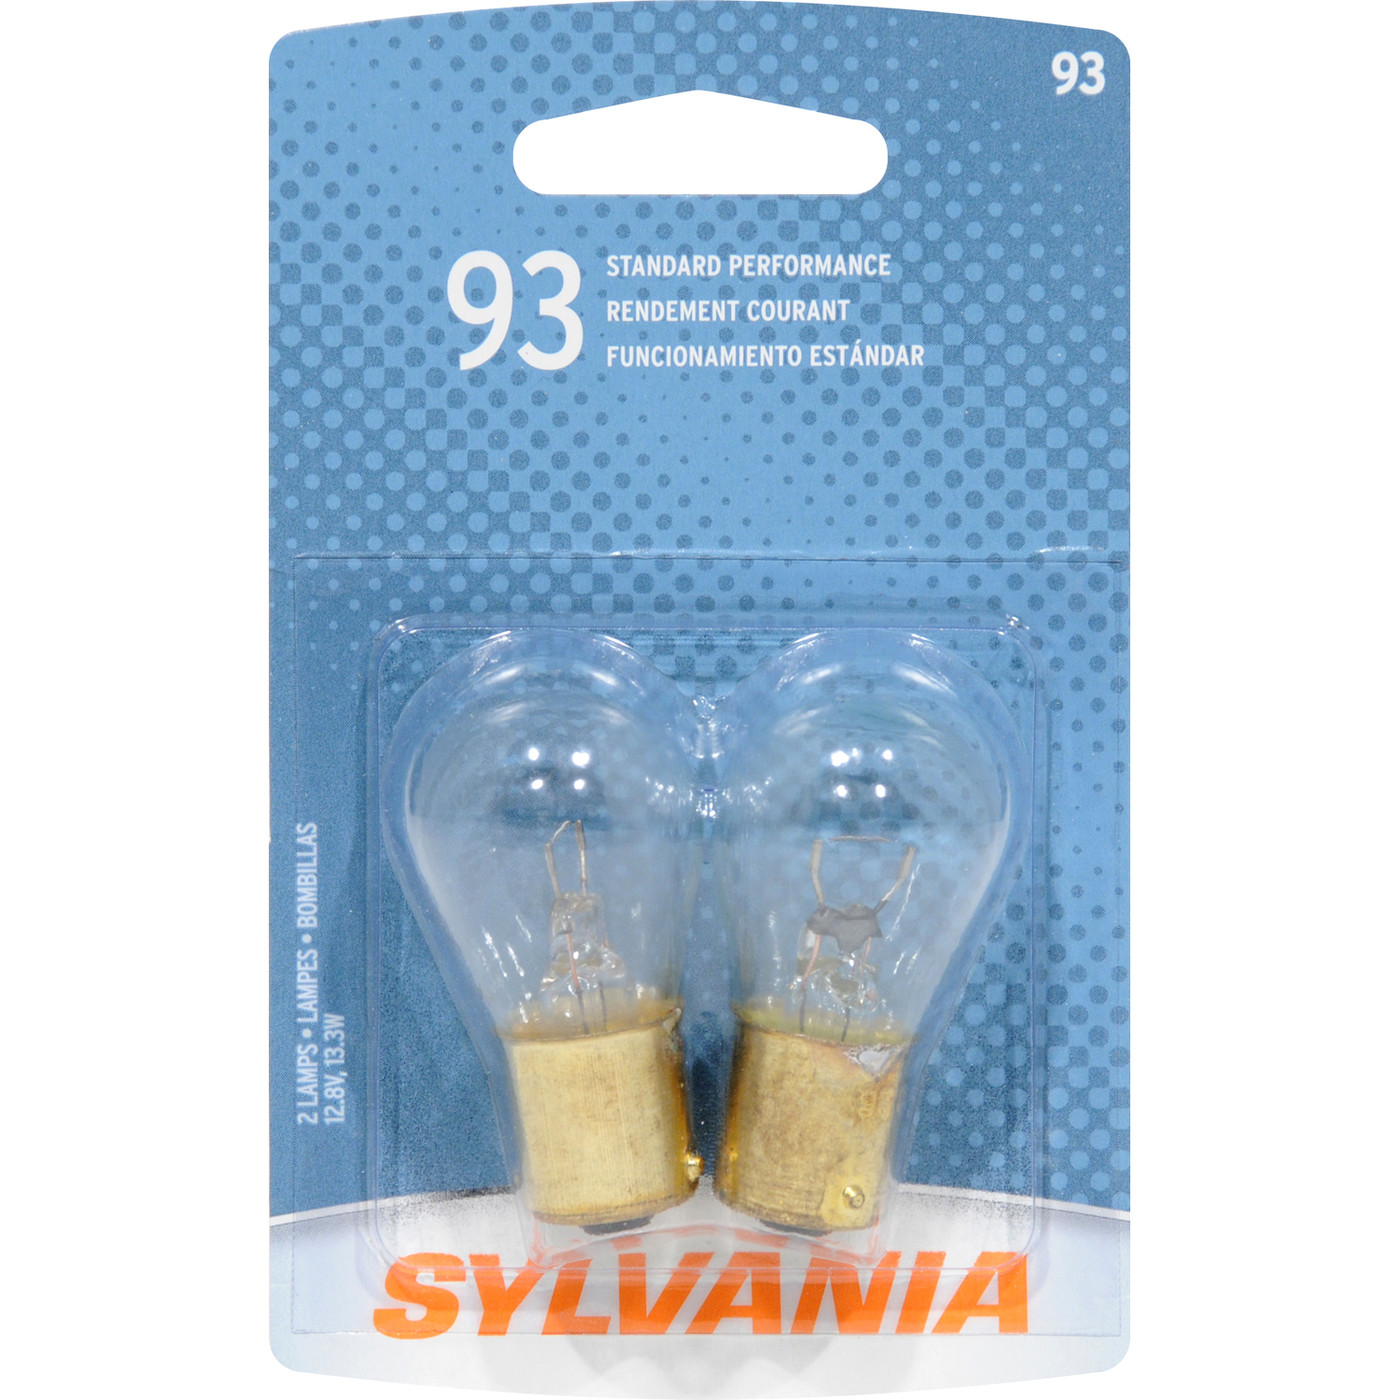 SYLVANIA RETAIL PACKS - Blister Pack Twin Engine Compartment Light Bulb - SYR 93.BP2